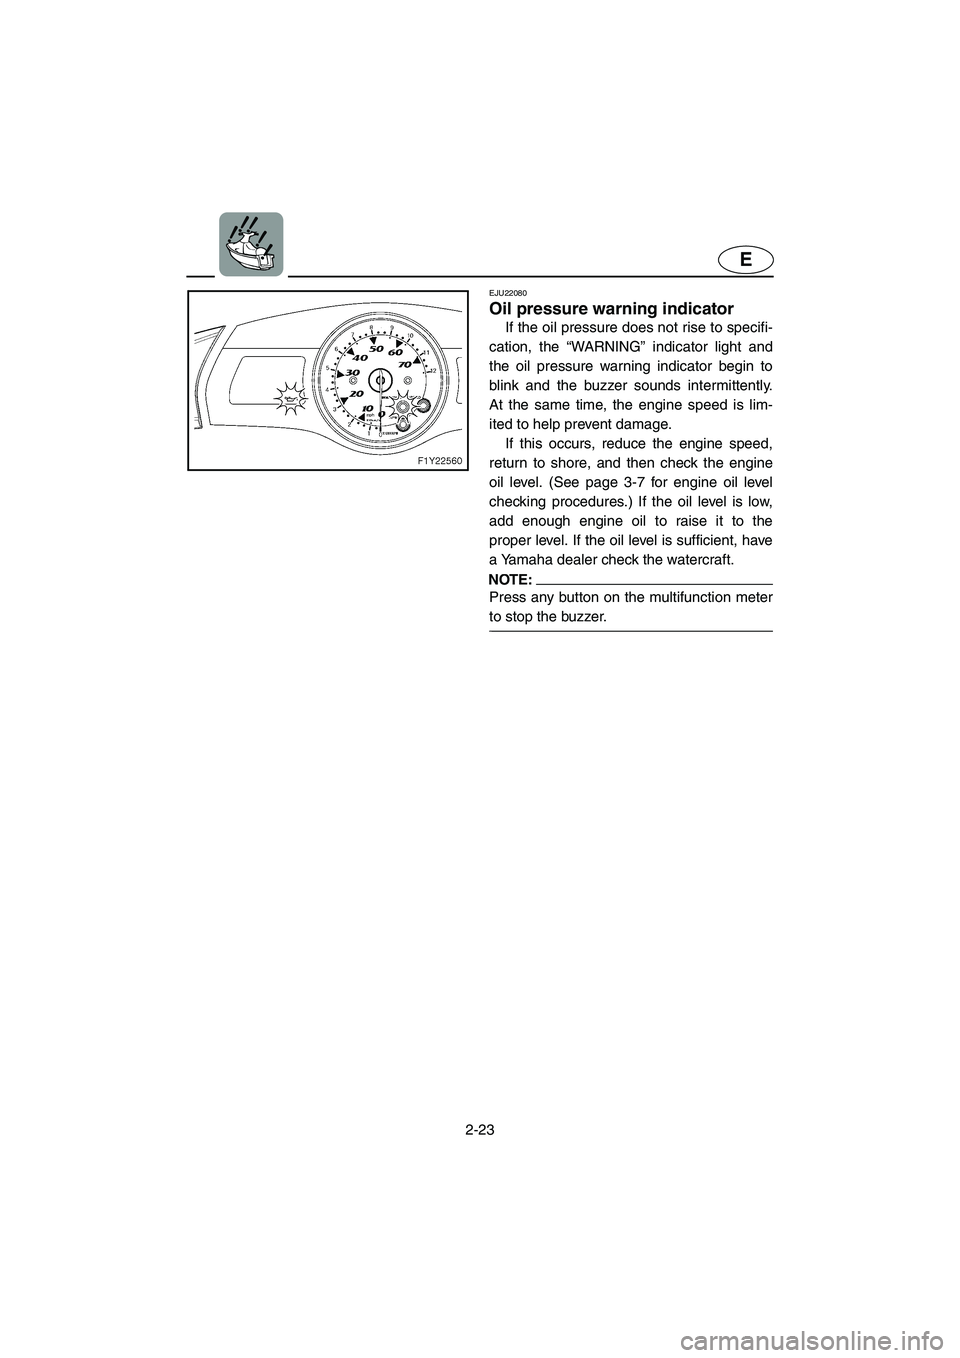 YAMAHA FX 2006  Owners Manual 2-23
E
EJU22080 
Oil pressure warning indicator 
If the oil pressure does not rise to specifi-
cation, the “WARNING” indicator light and
the oil pressure warning indicator begin to
blink and the b